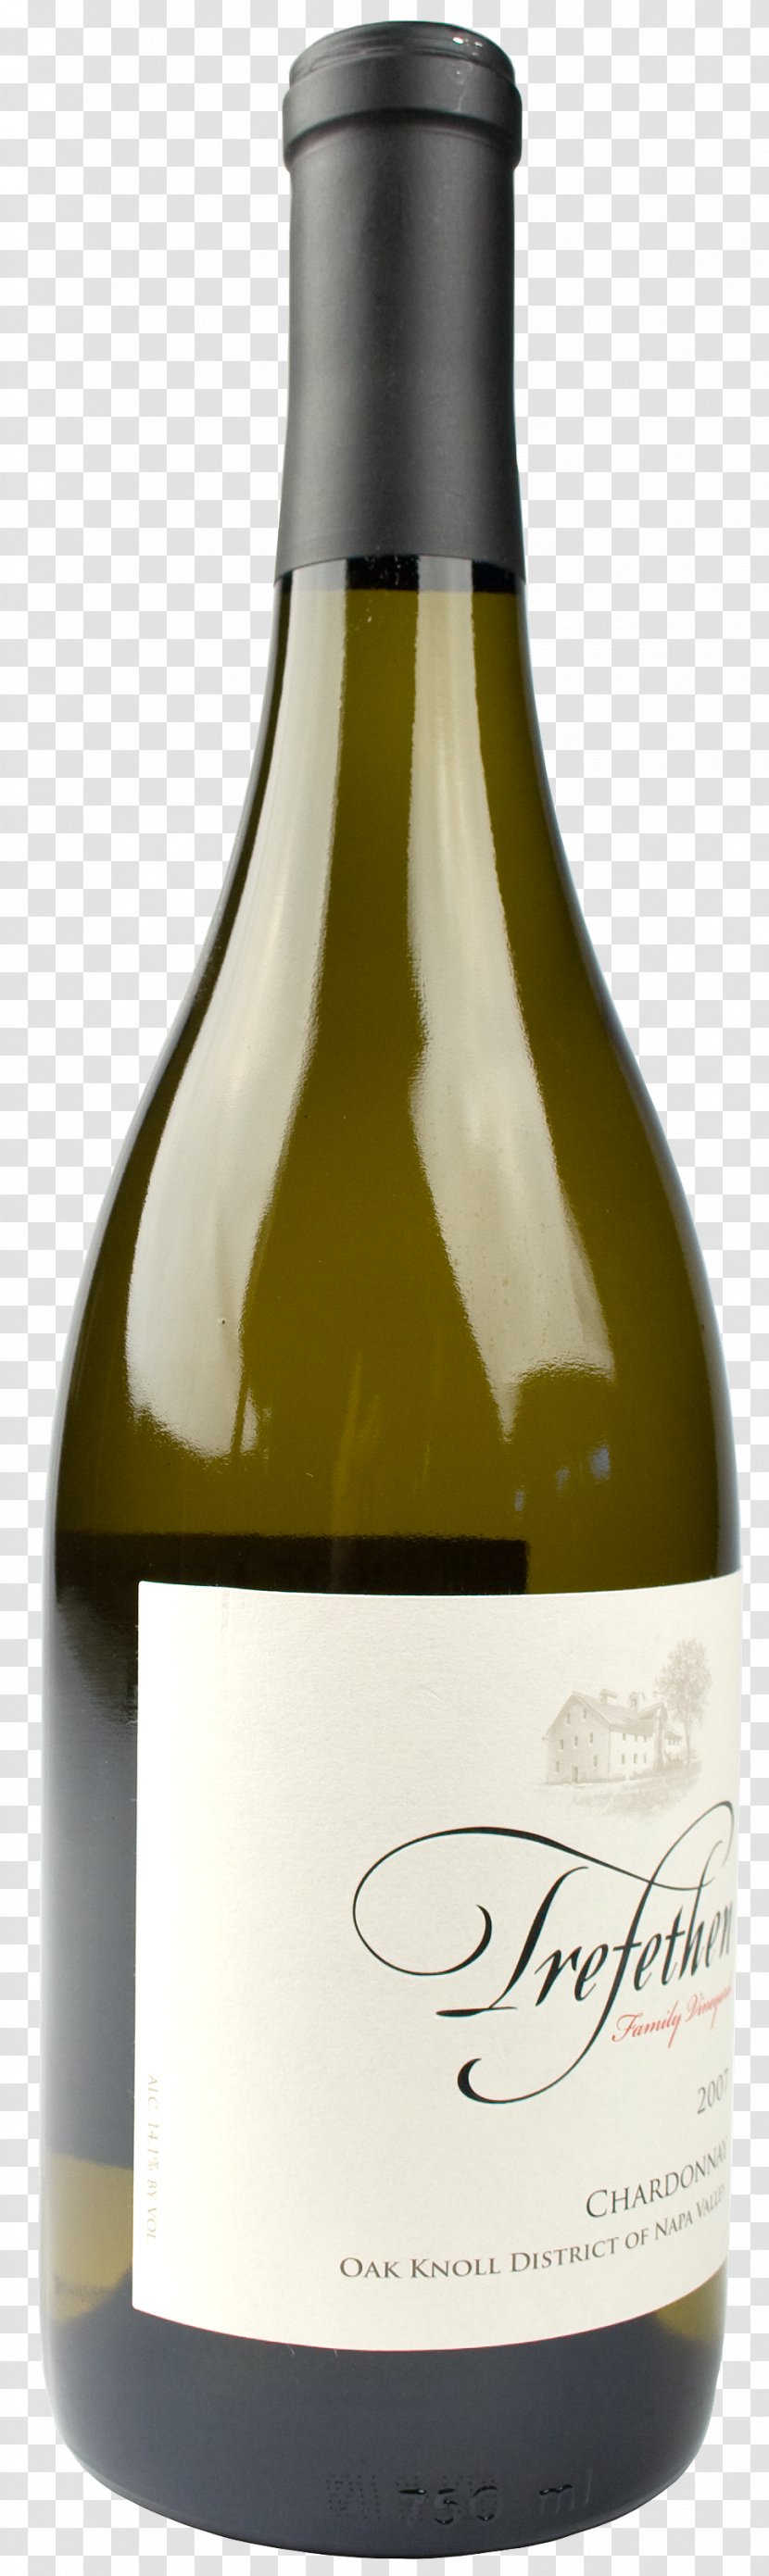 Chardonnay Wine Russian River Valley AVA Sauvignon Blanc Pinot Noir - Champagne Transparent PNG